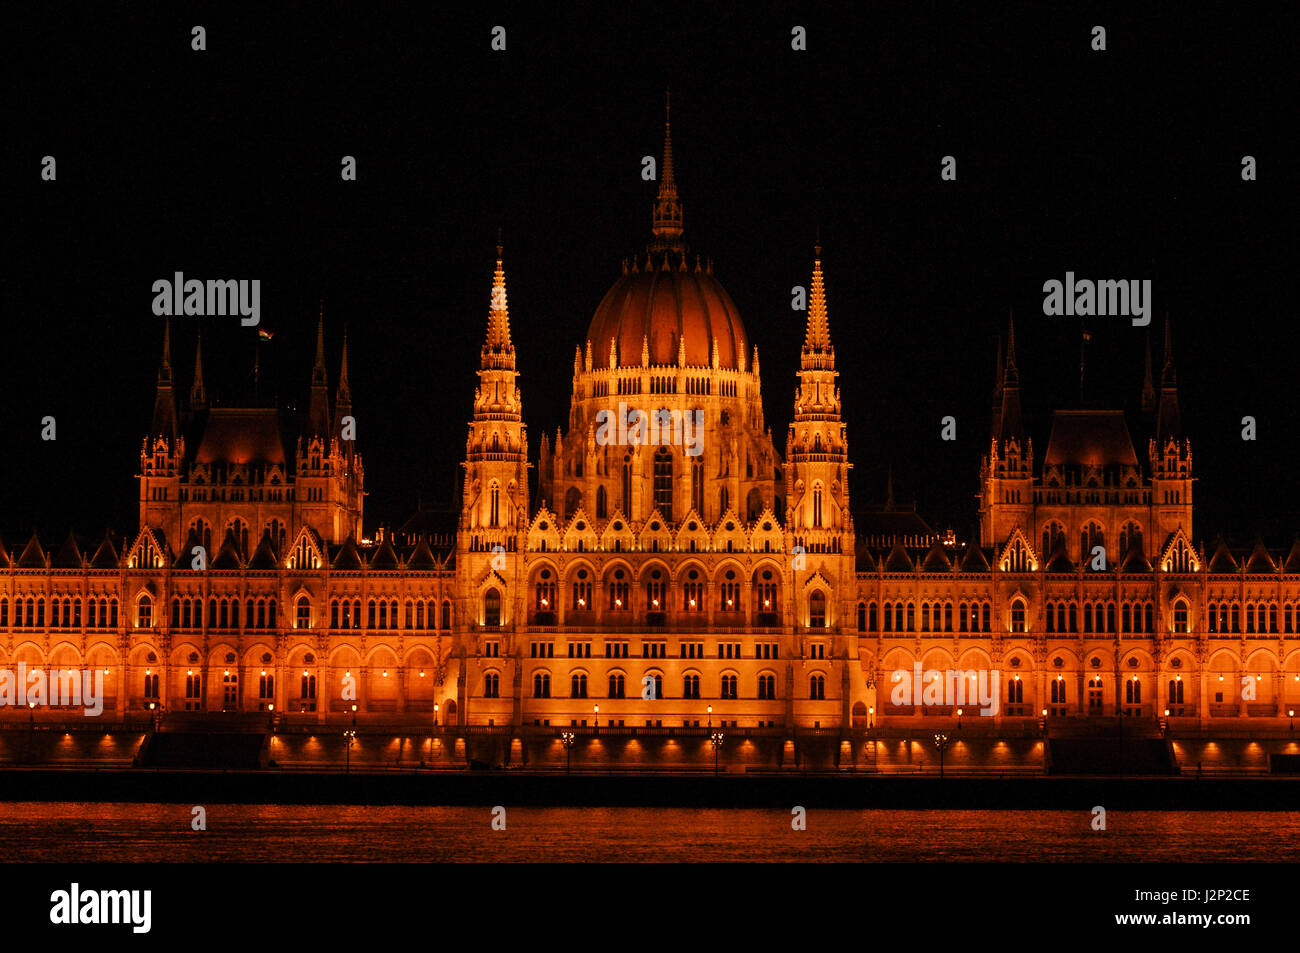 European architecture at its finest with the Budapest parliament building. European cities make travel in europe a marvel. Stock Photo